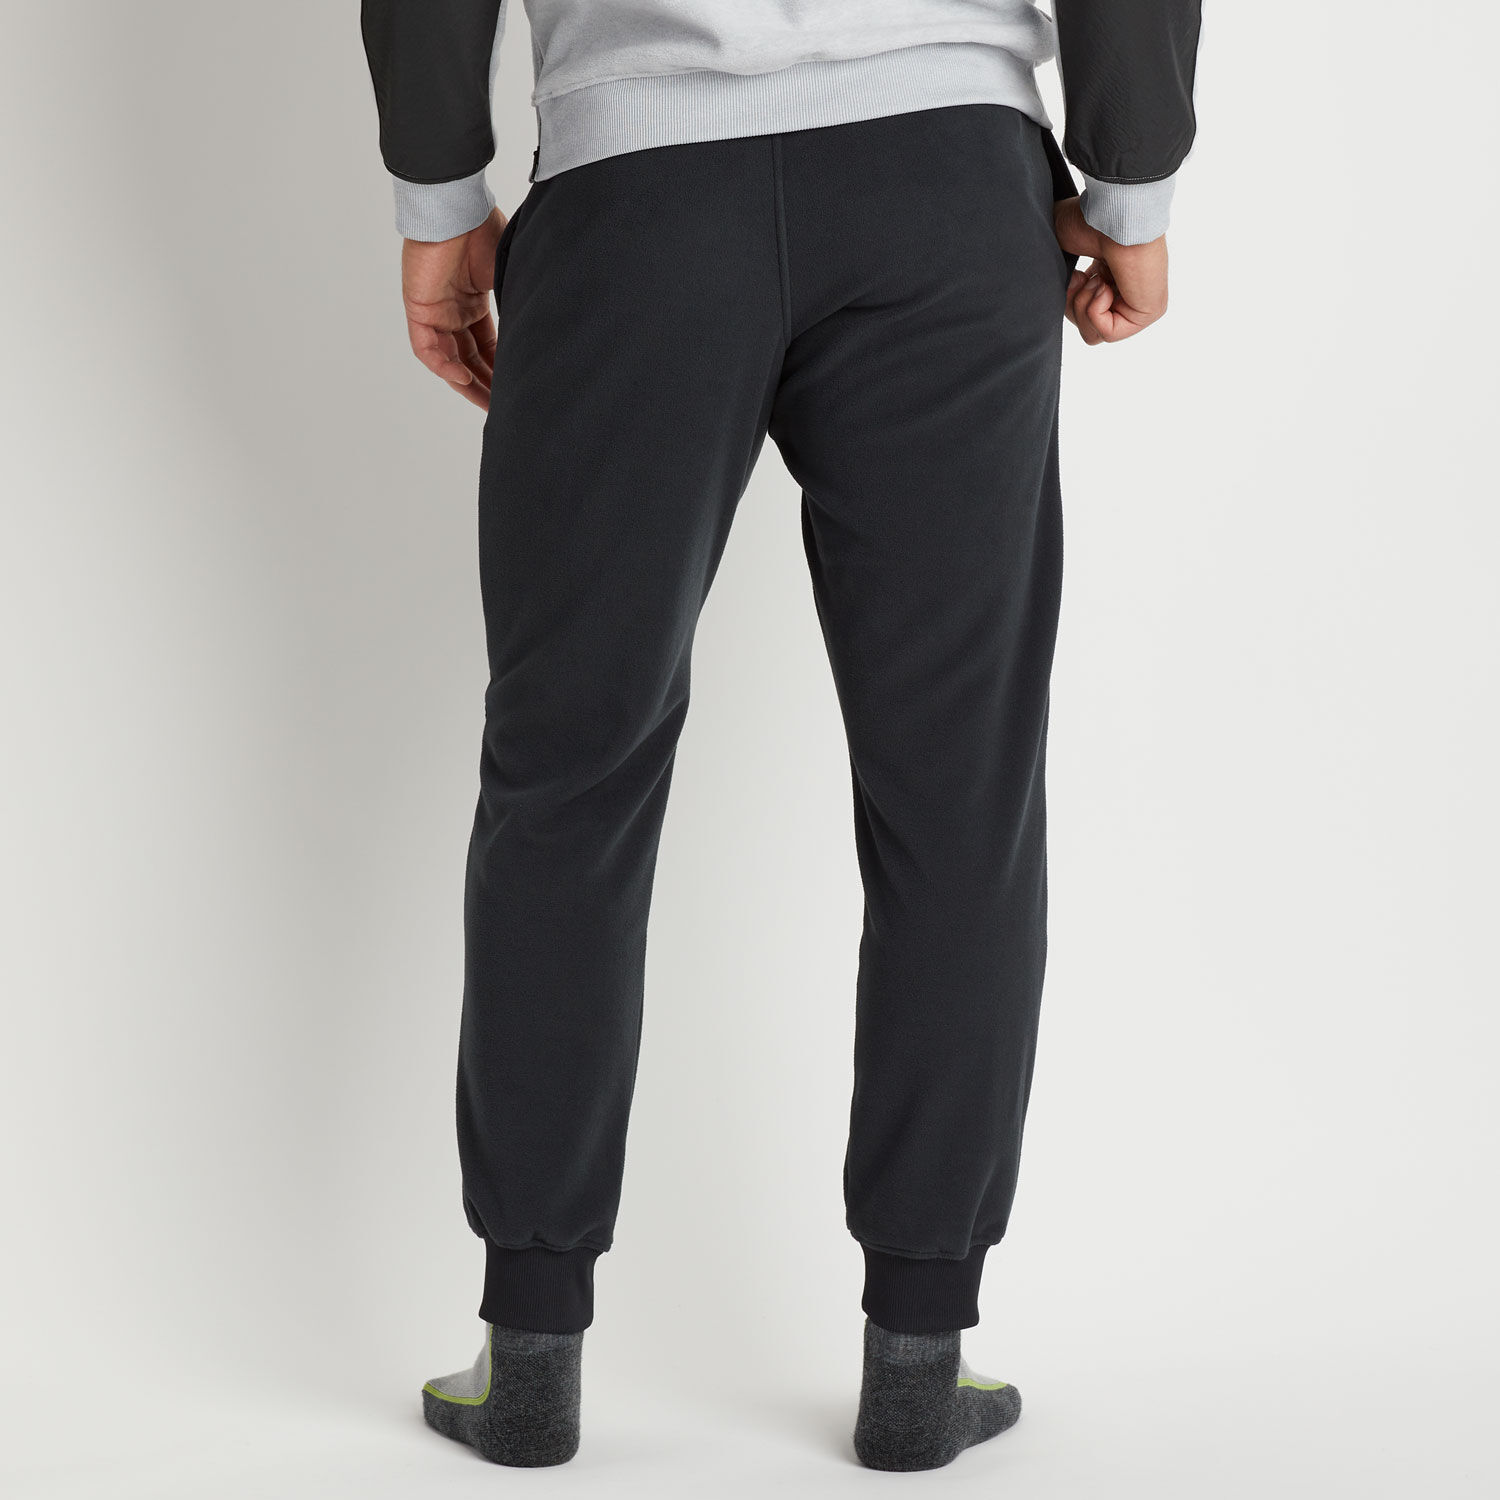 Buy nike trousers for men under 600 in India @ Limeroad